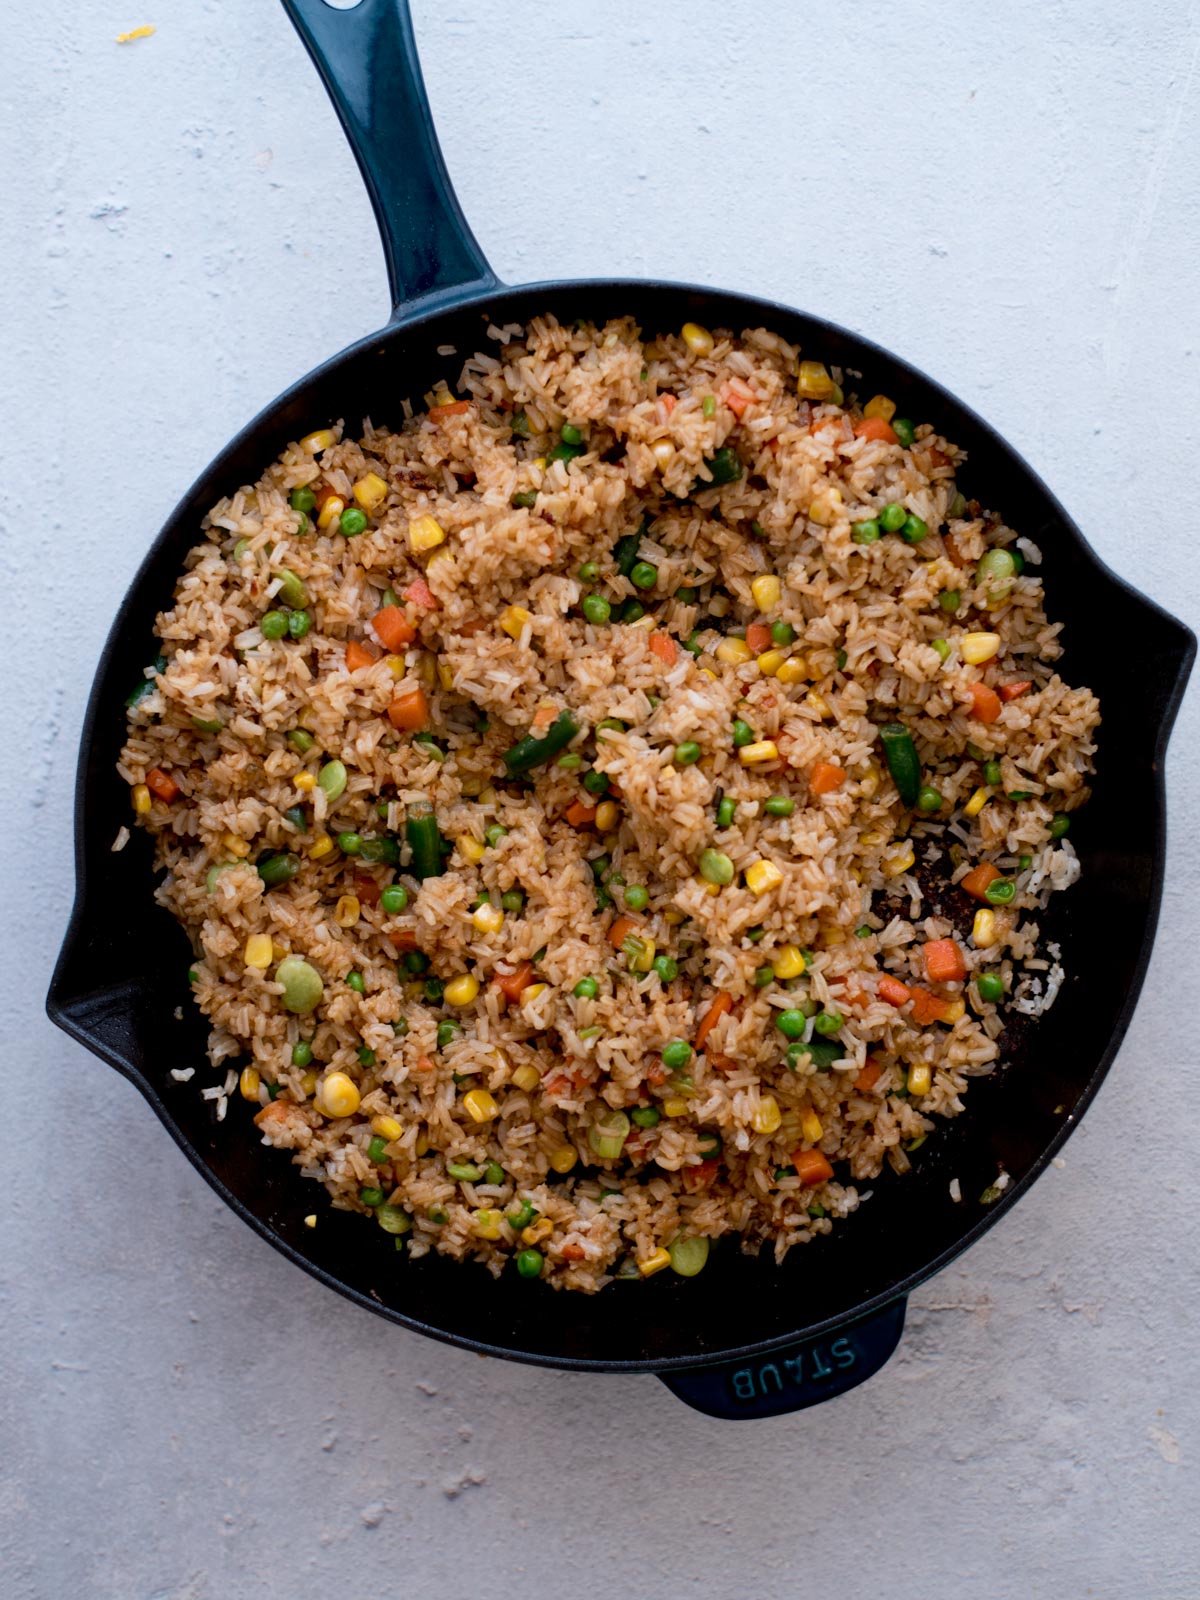 soy sauce coated rice in a skillet with vegetables, garlic, and green onions